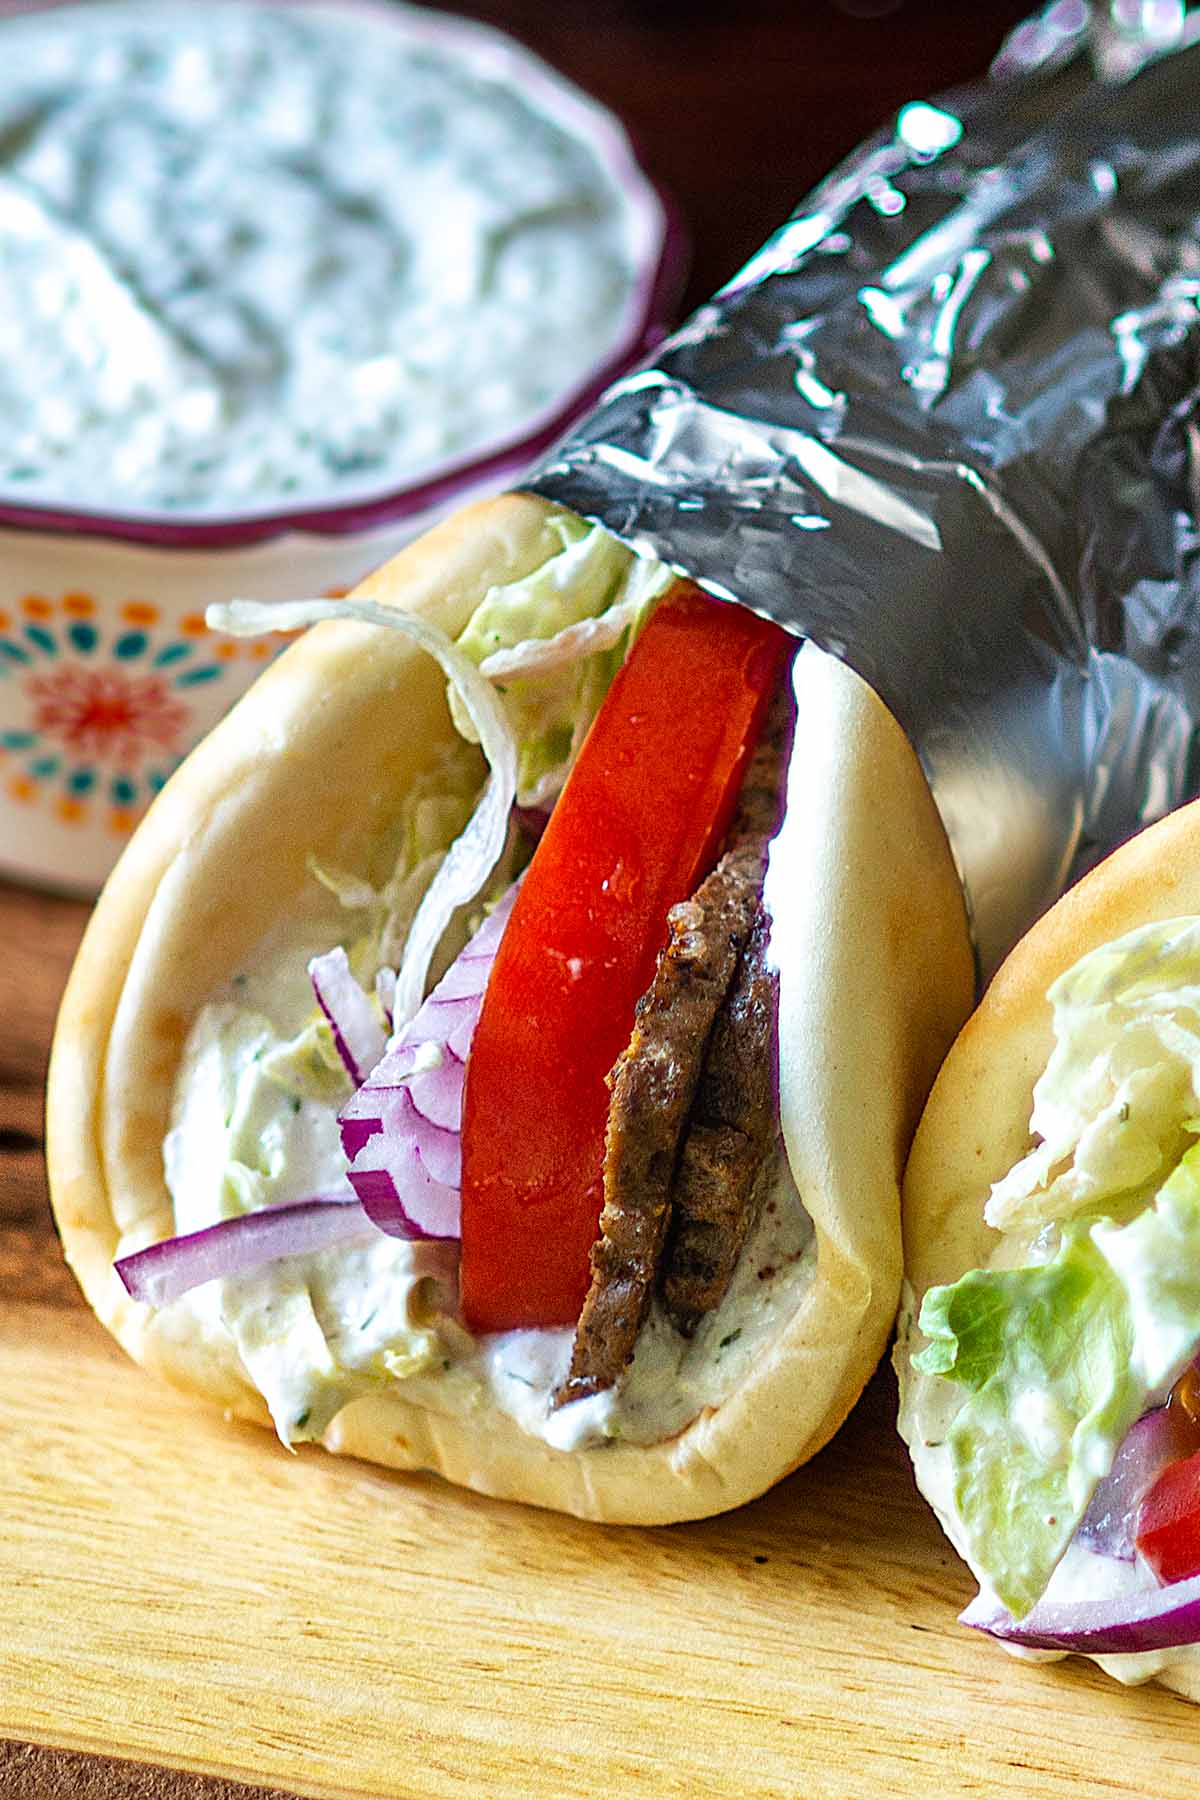 Homemade Gyros wrapped in foil and served on a wooden serving board.